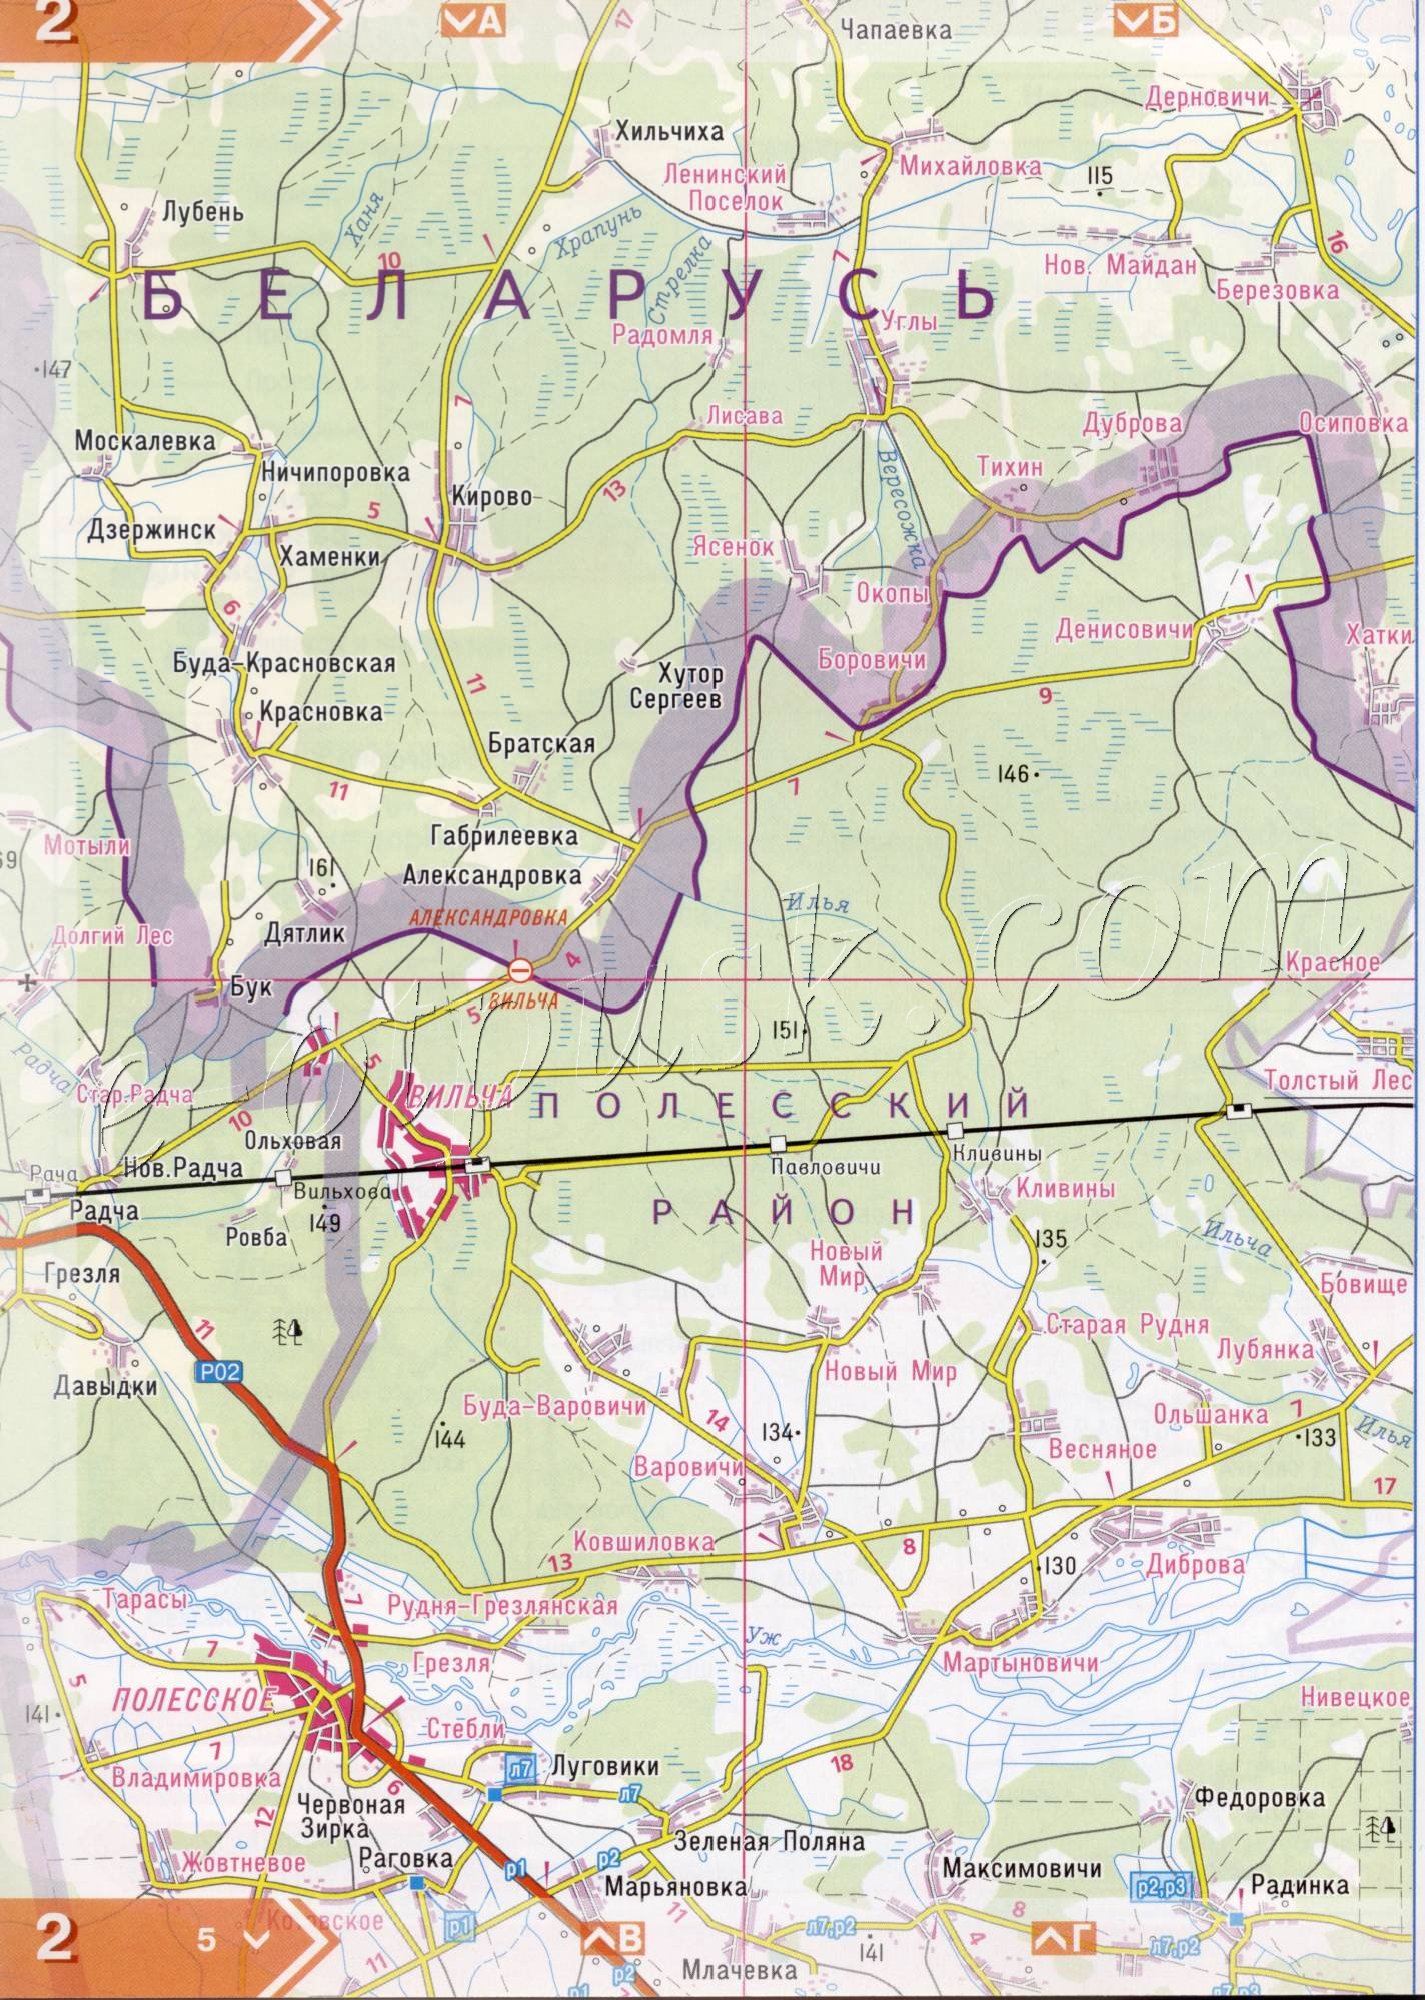 Atlas of the Kiev region. Detailed map of the Kiev region from the road atlas. Kiev region on a detailed map of scale 1cm = 3km. Free Download Chapaevka, Khania, Khrapun